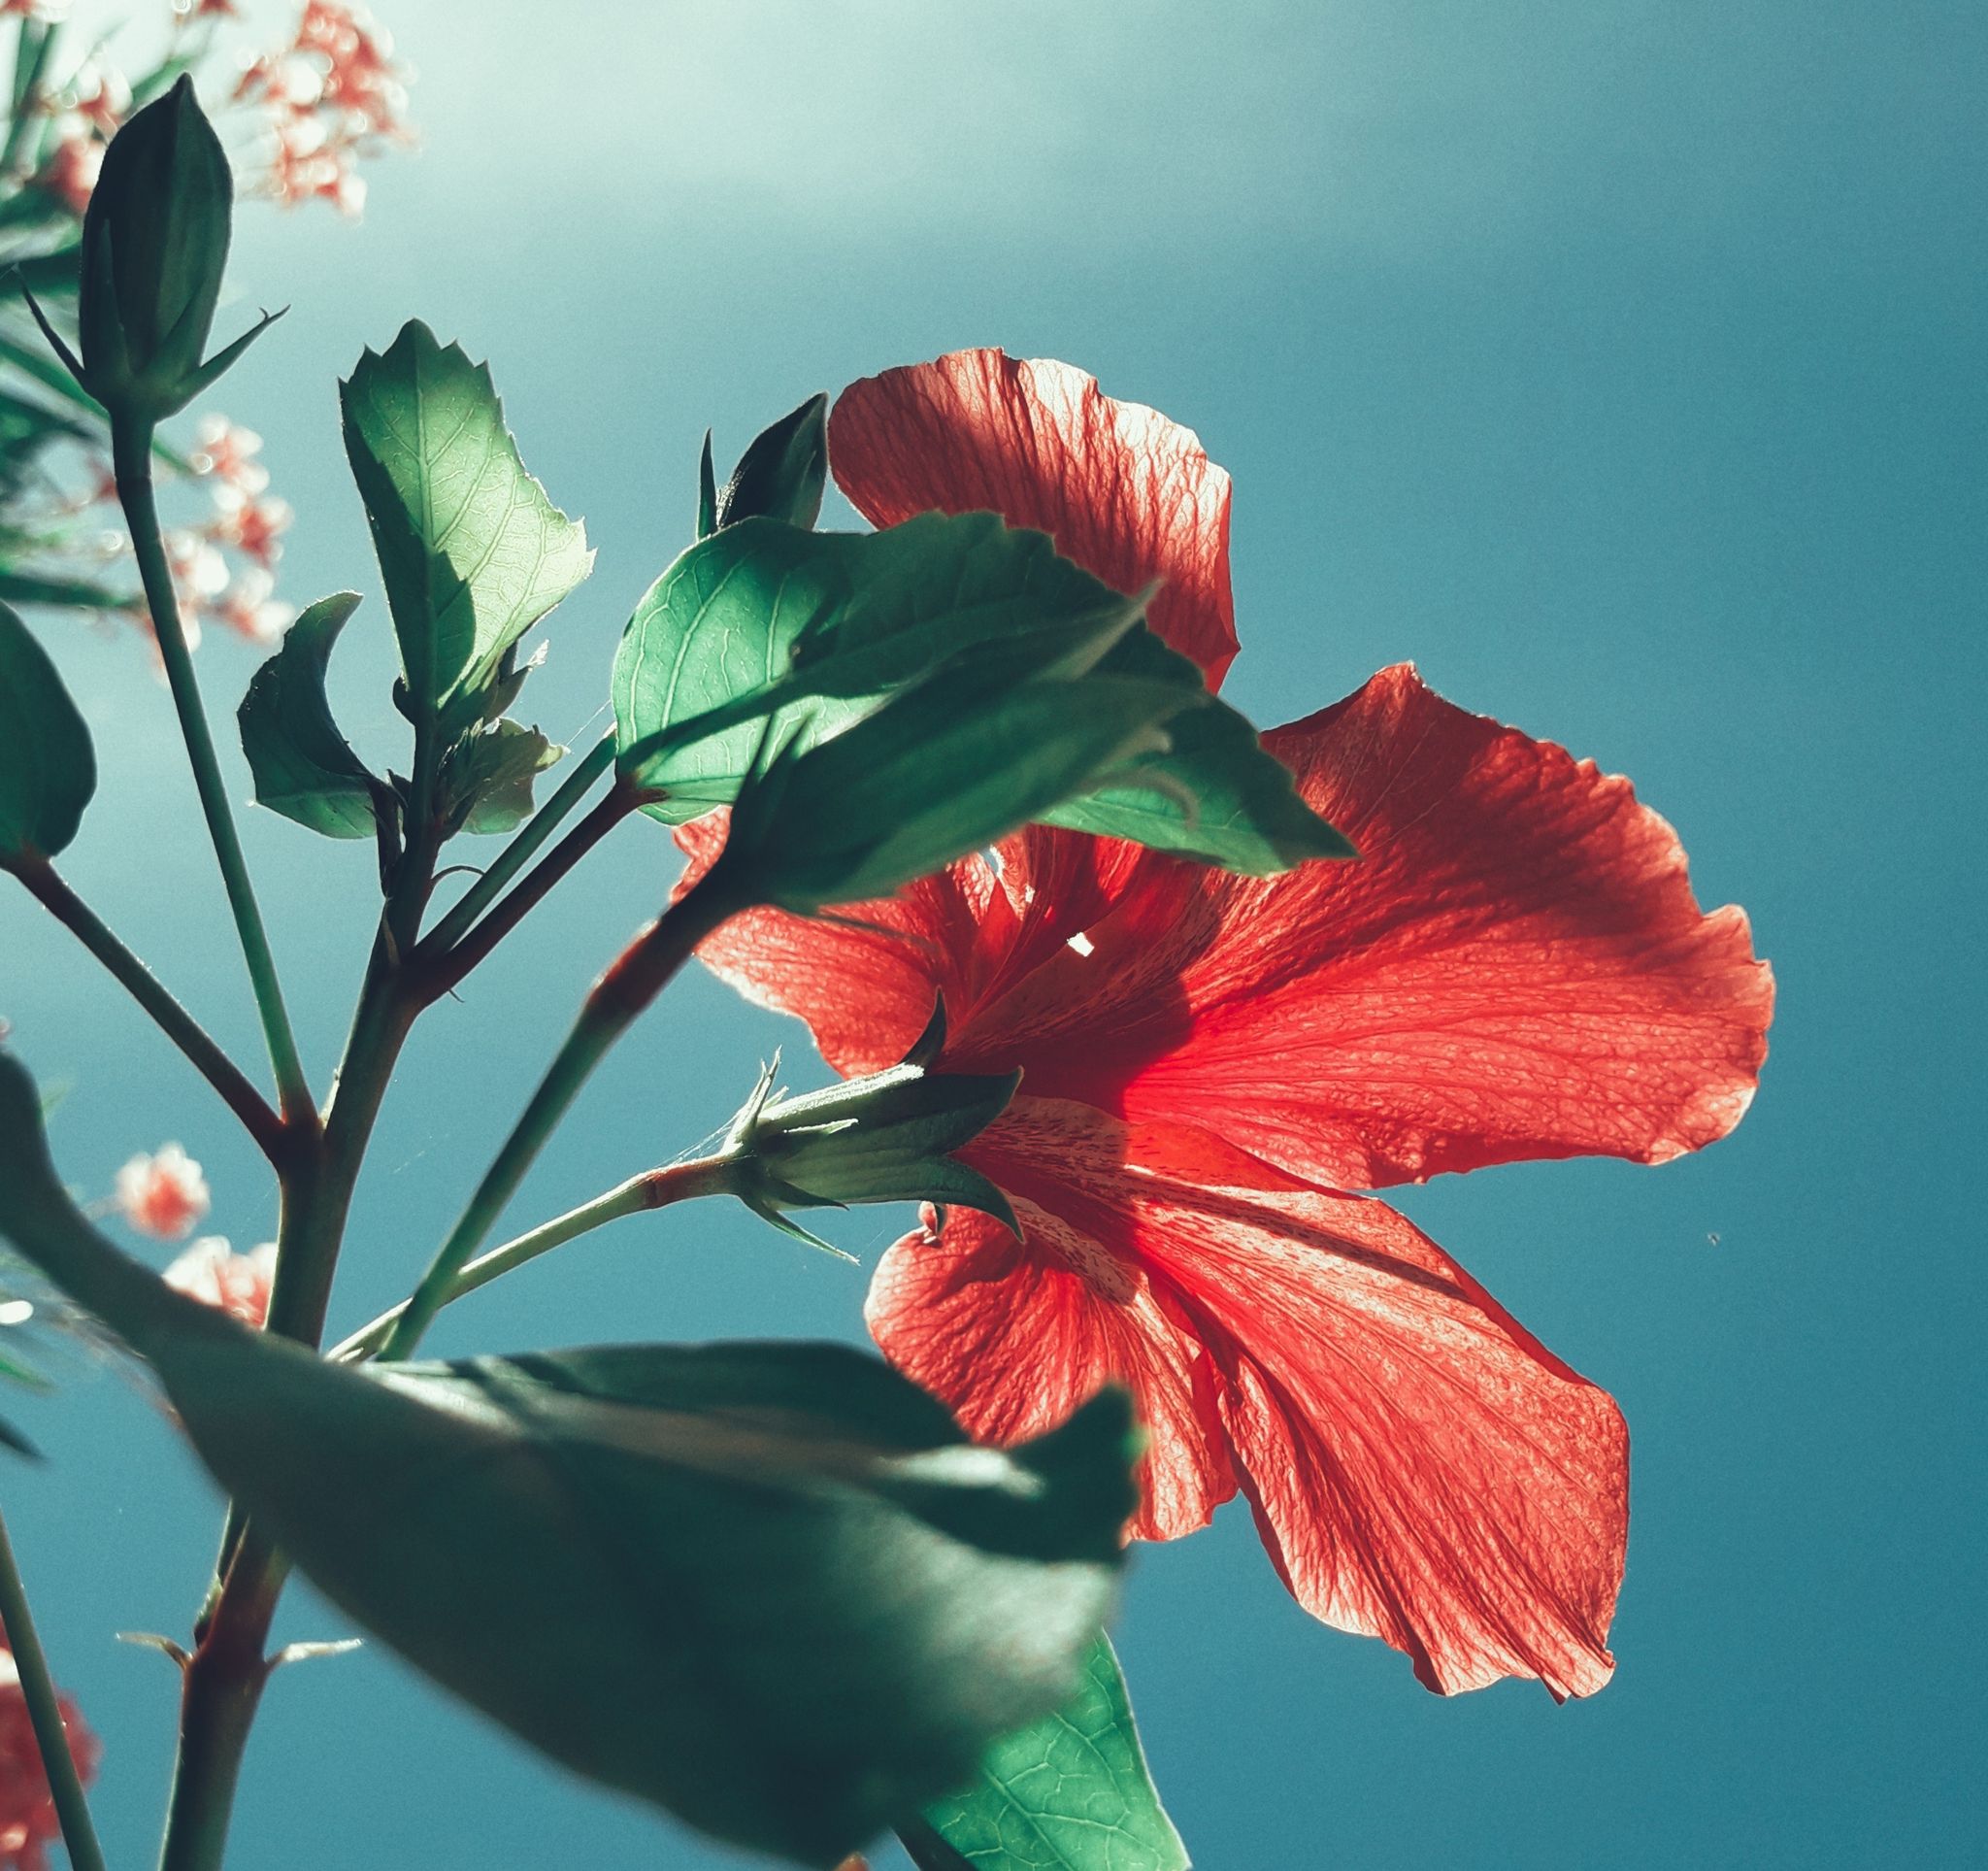 Flower, Flowering plant, Plant, Petal, Hawaiian hibiscus, Hibiscus, Chinese hibiscus, Botany, Malvales, Mallow family, 